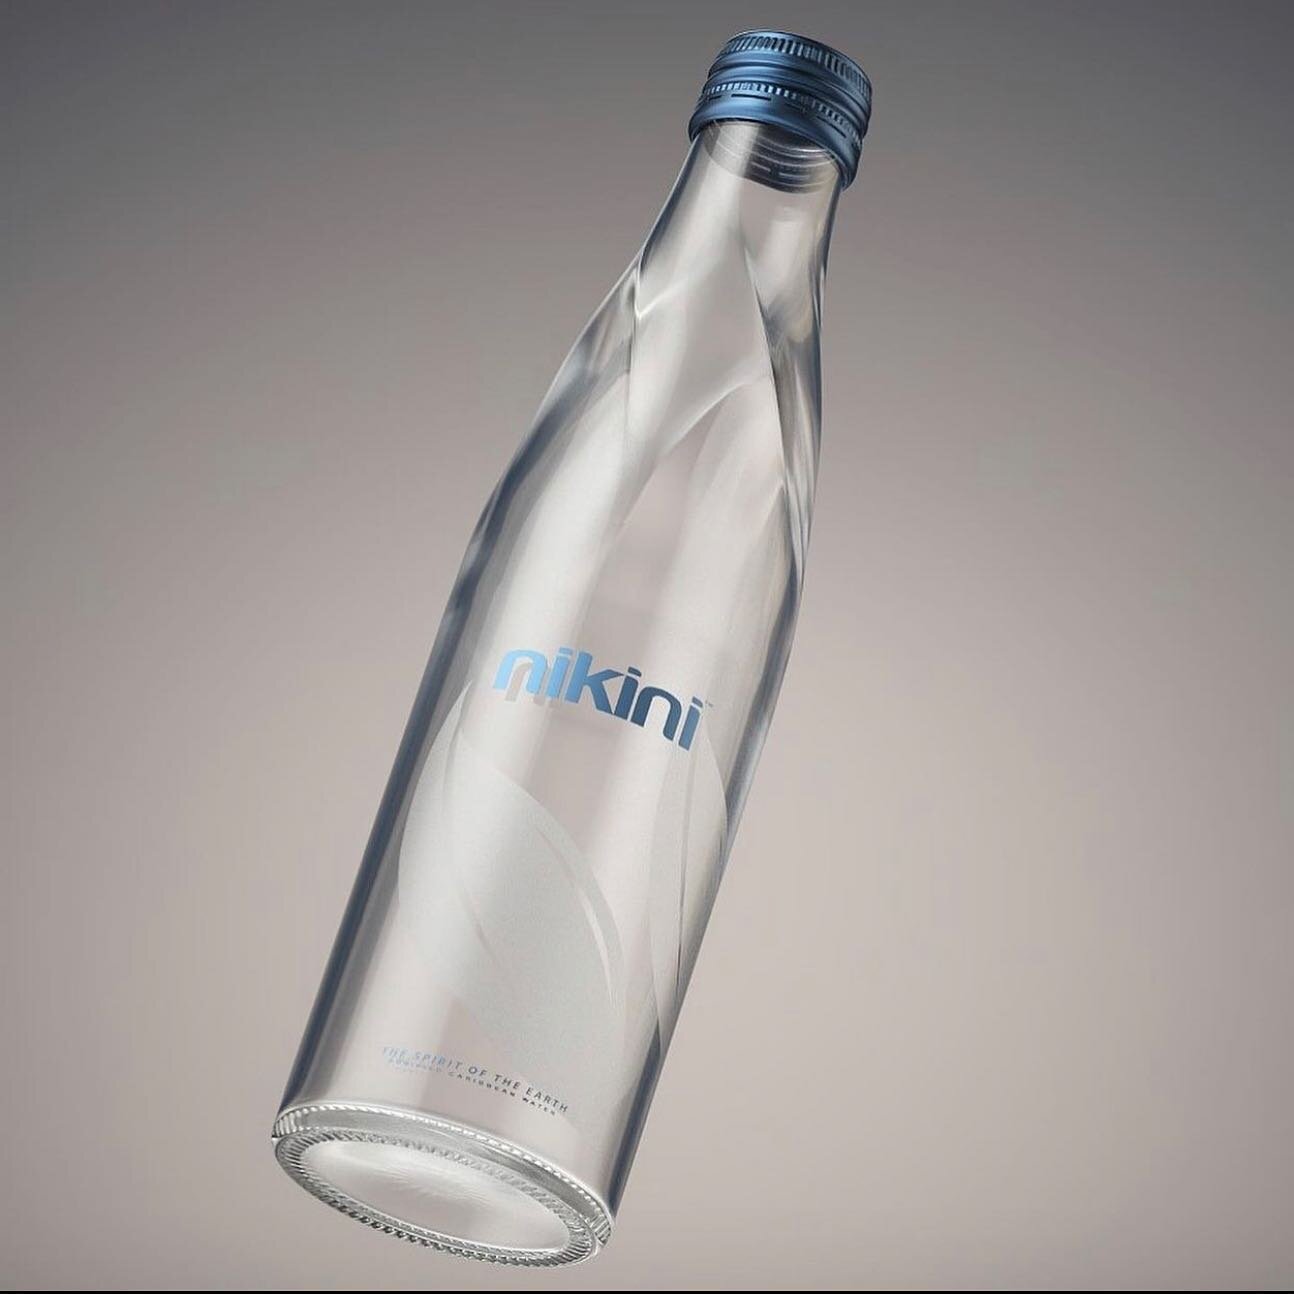 Concept ................................... Disclaimer 
This is a concept, not an official redesign of Nikini bottle. The project is non-commercial and was created as a part of design research exercise.

#bottle #water #puertorico #brand #branding #p